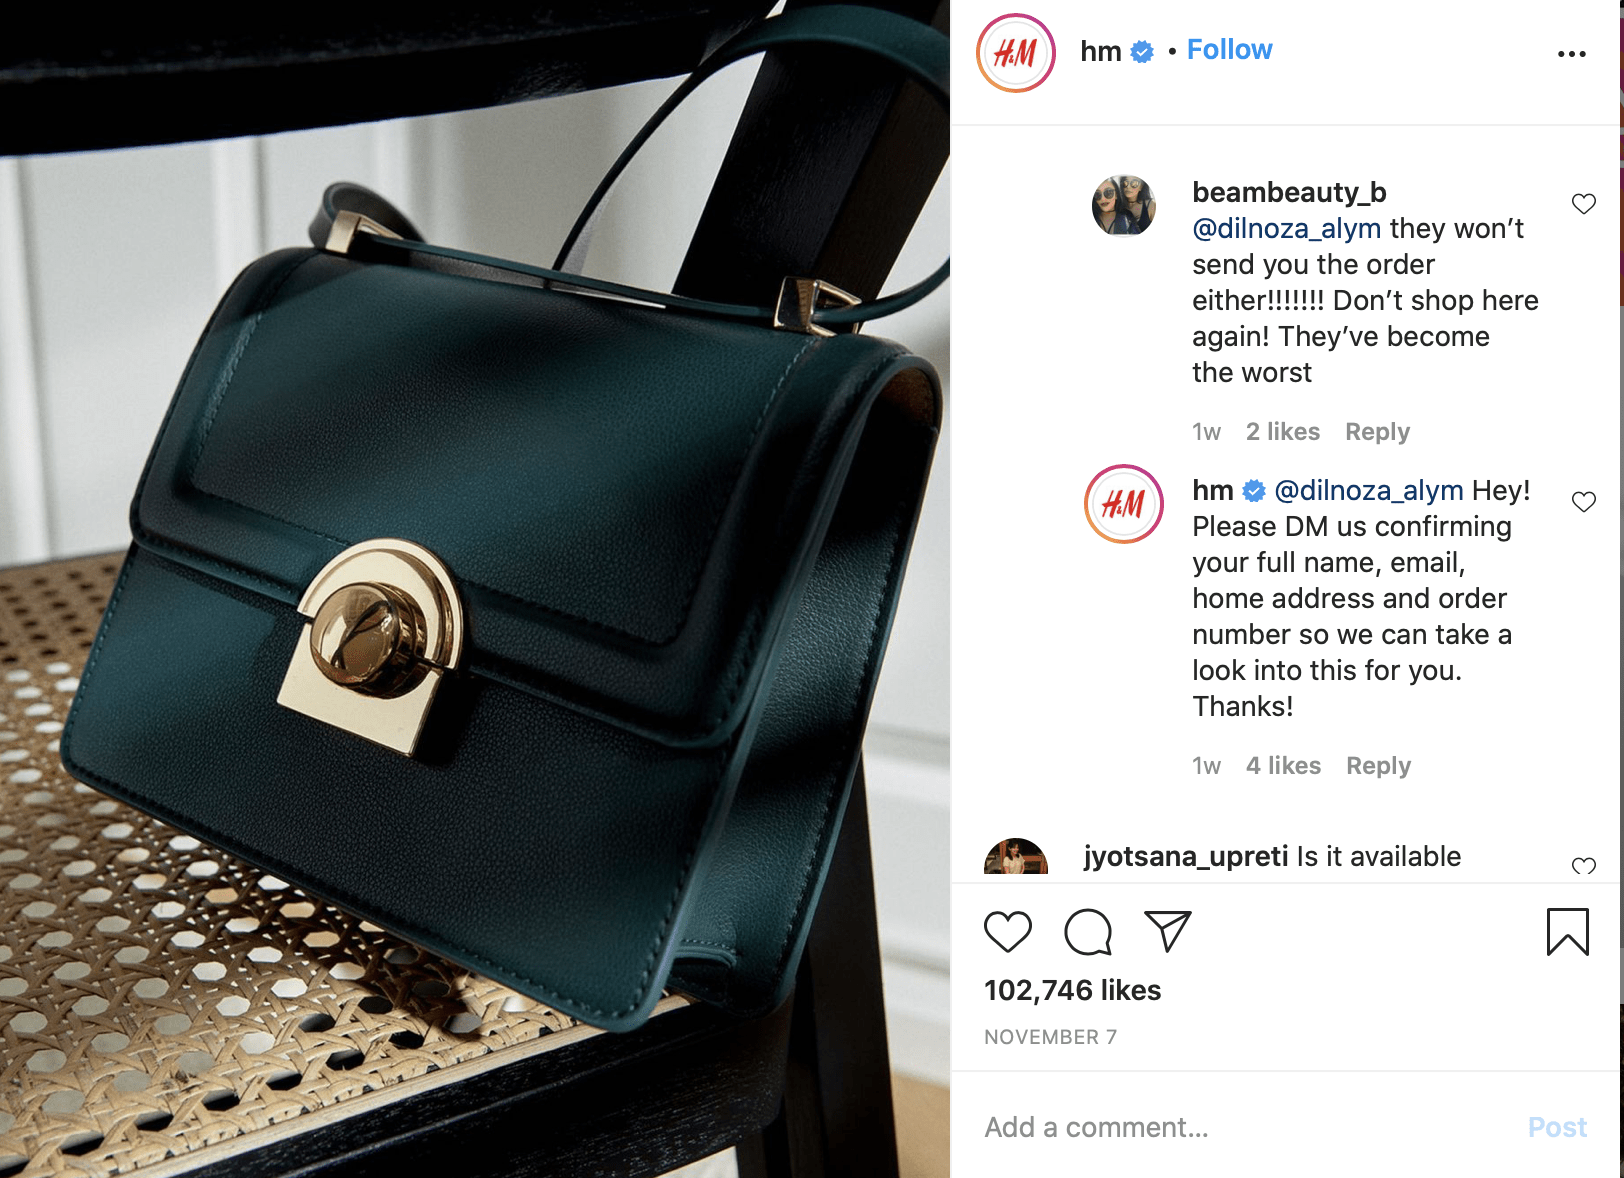 Another example of supporting customers on Instagram.